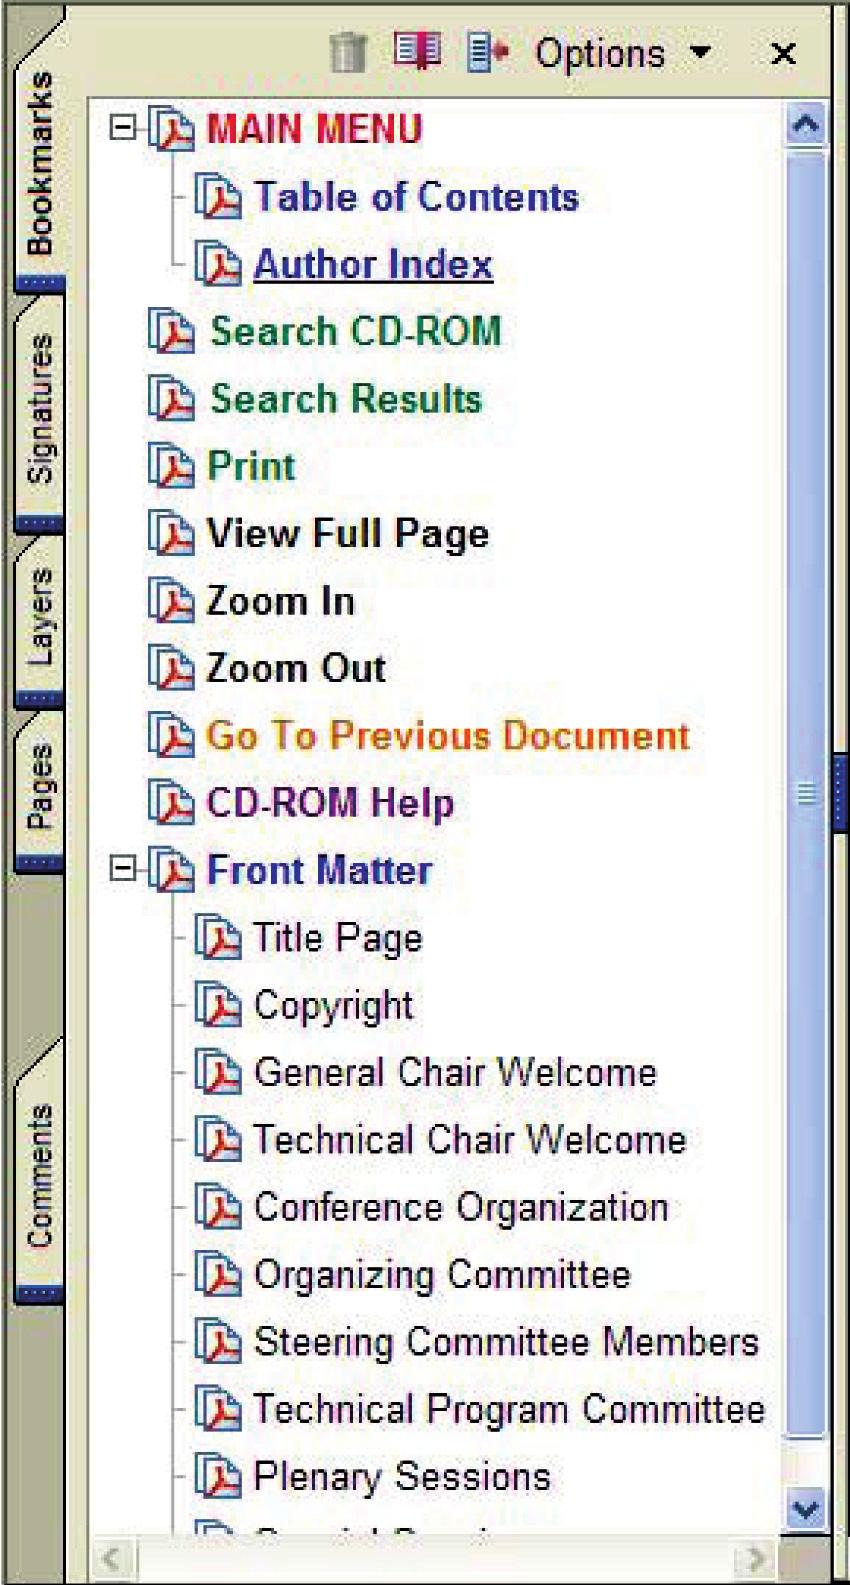 A panel opens on the left side of the screen displaying bookmarks in a hierarchy.